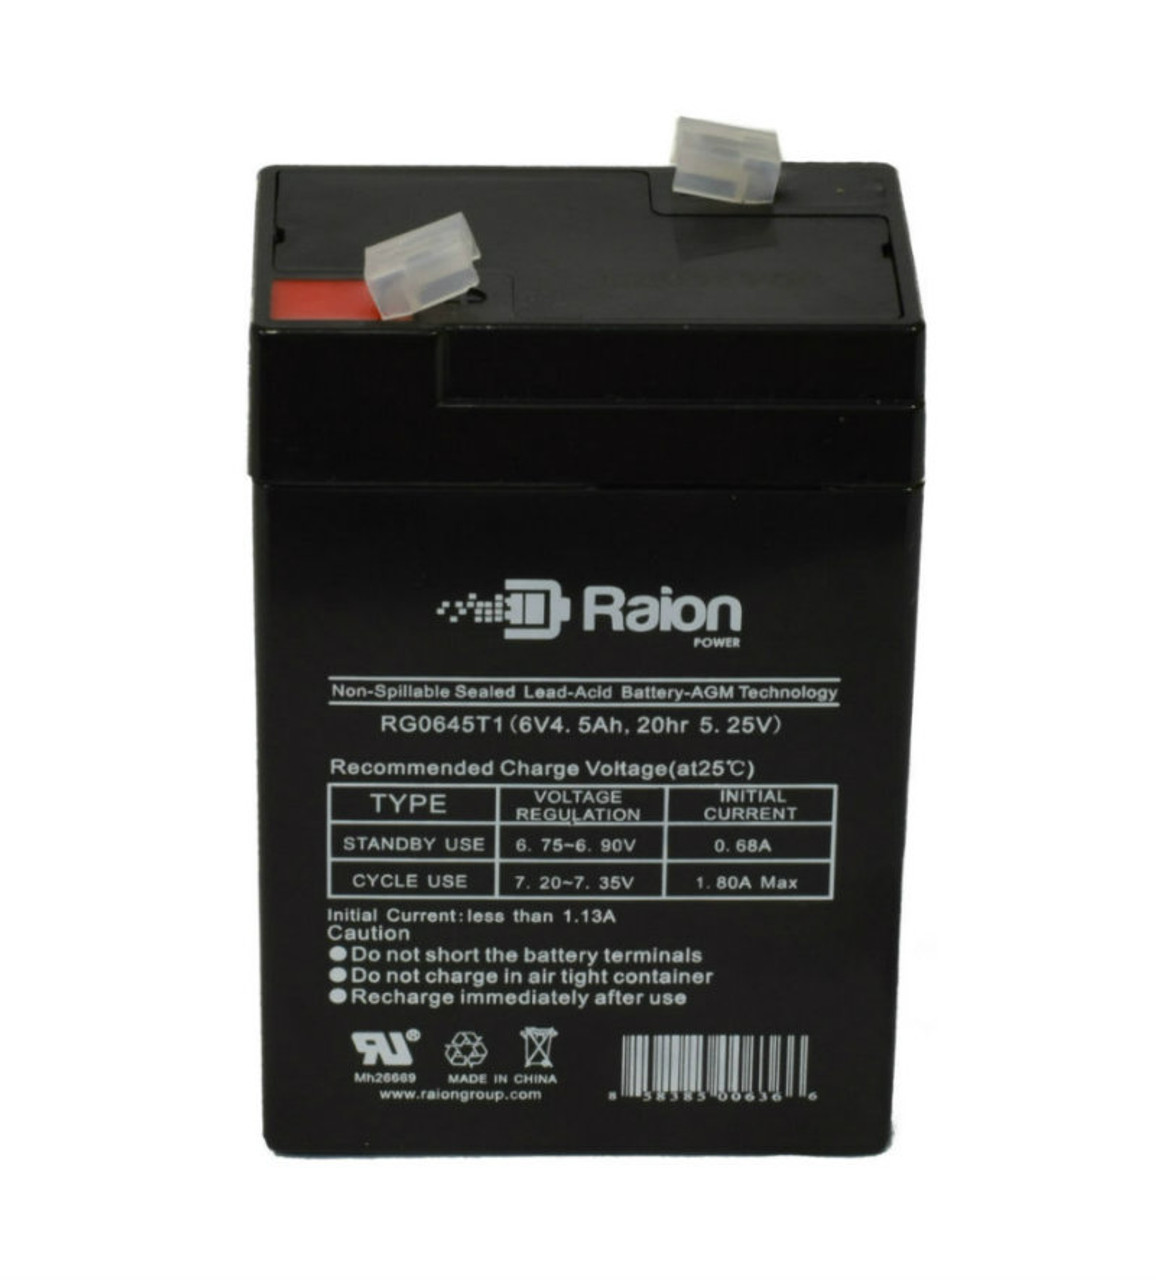 Raion Power RG0645T1 Replacement Battery Cartridge for Orion Research Sodium Potassium Analyzer 1020